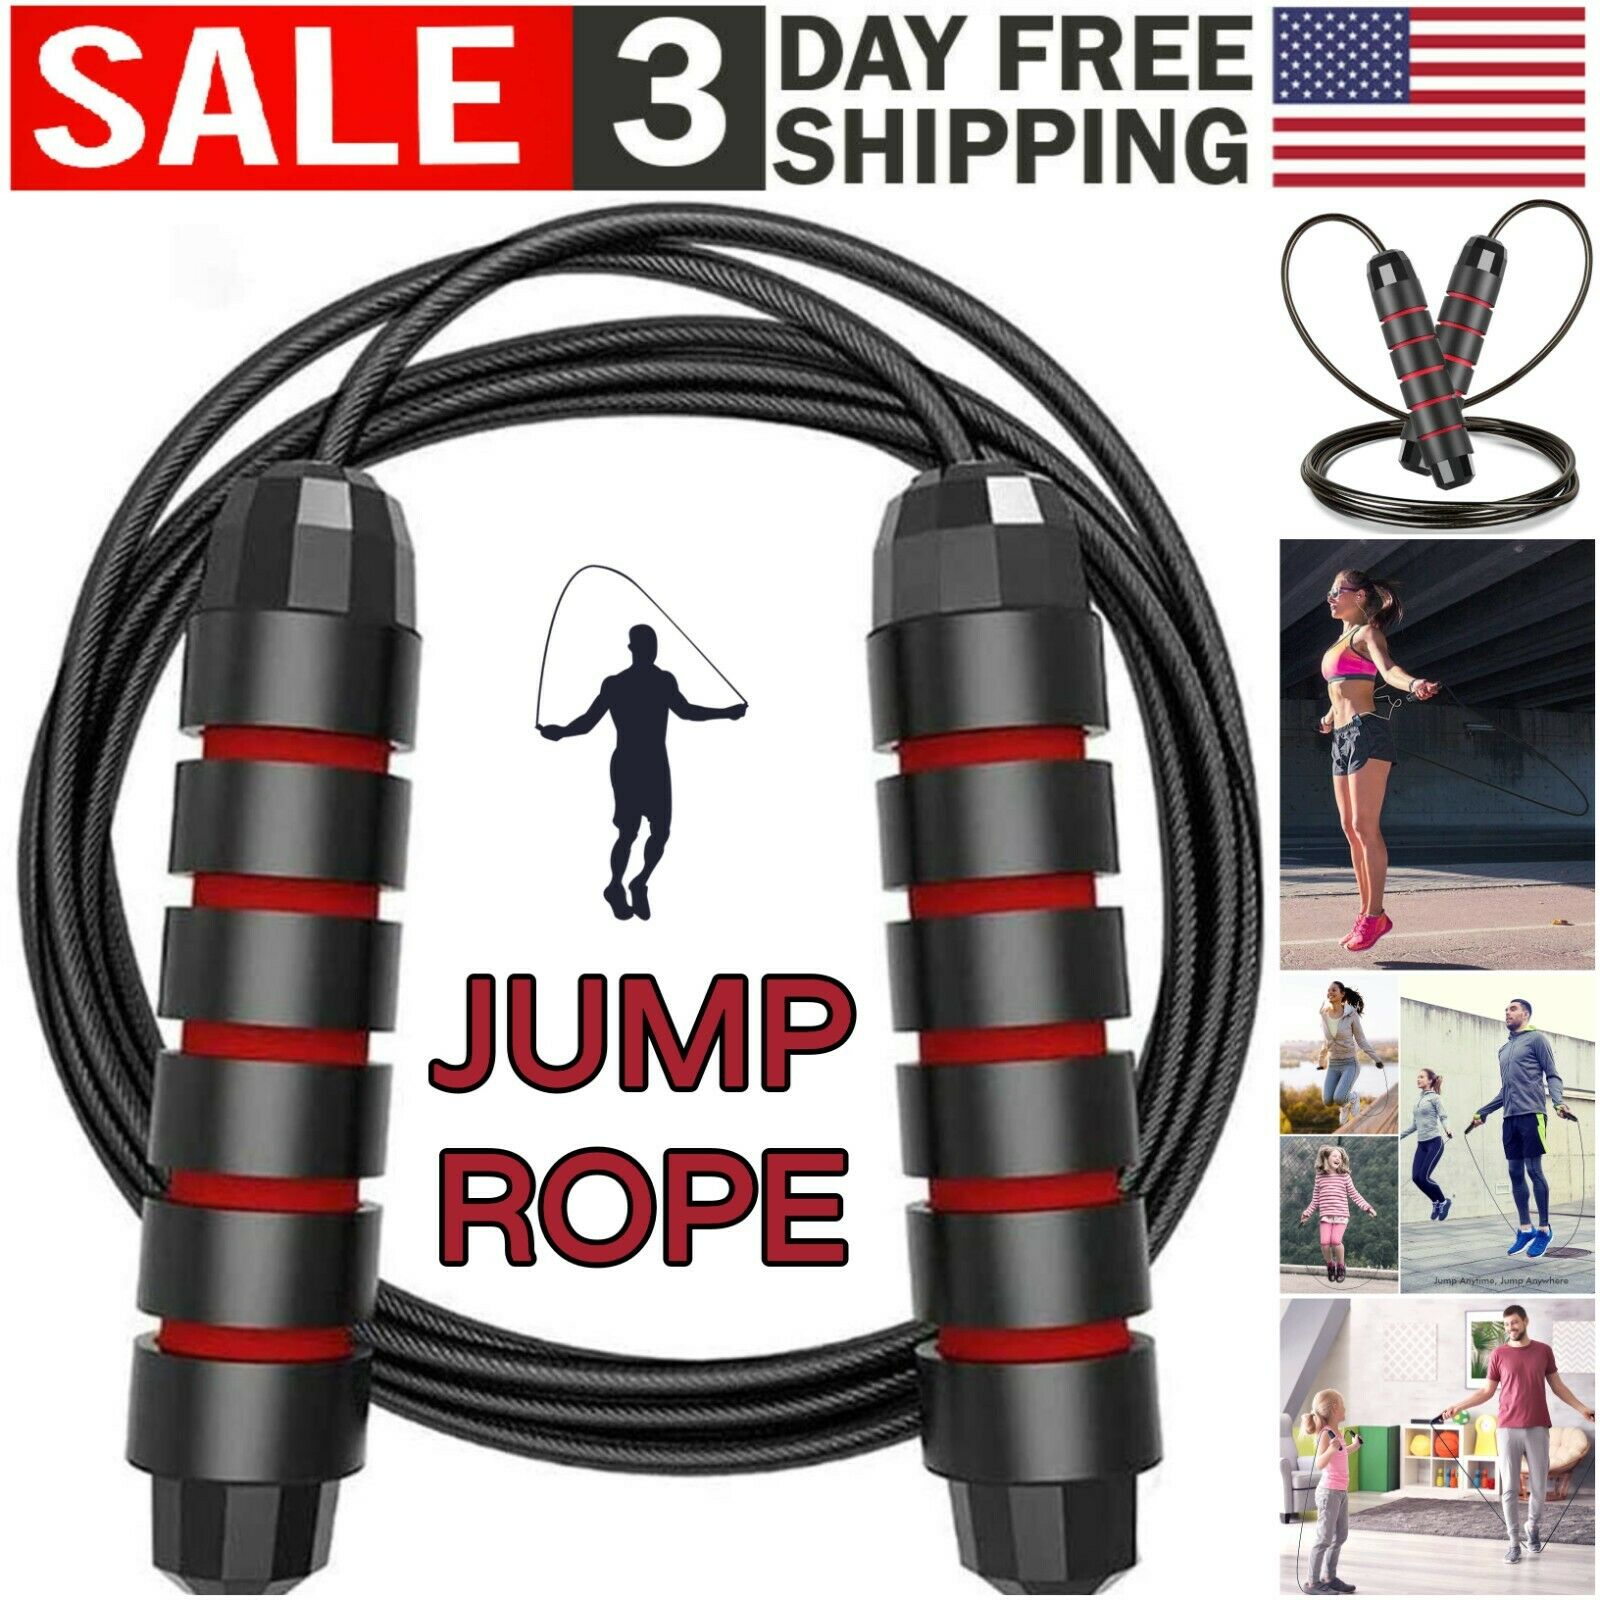 Speed Jump Rope Crossfit Aerobic Exercise Boxing Workout Fitenss Jumping Rope Us